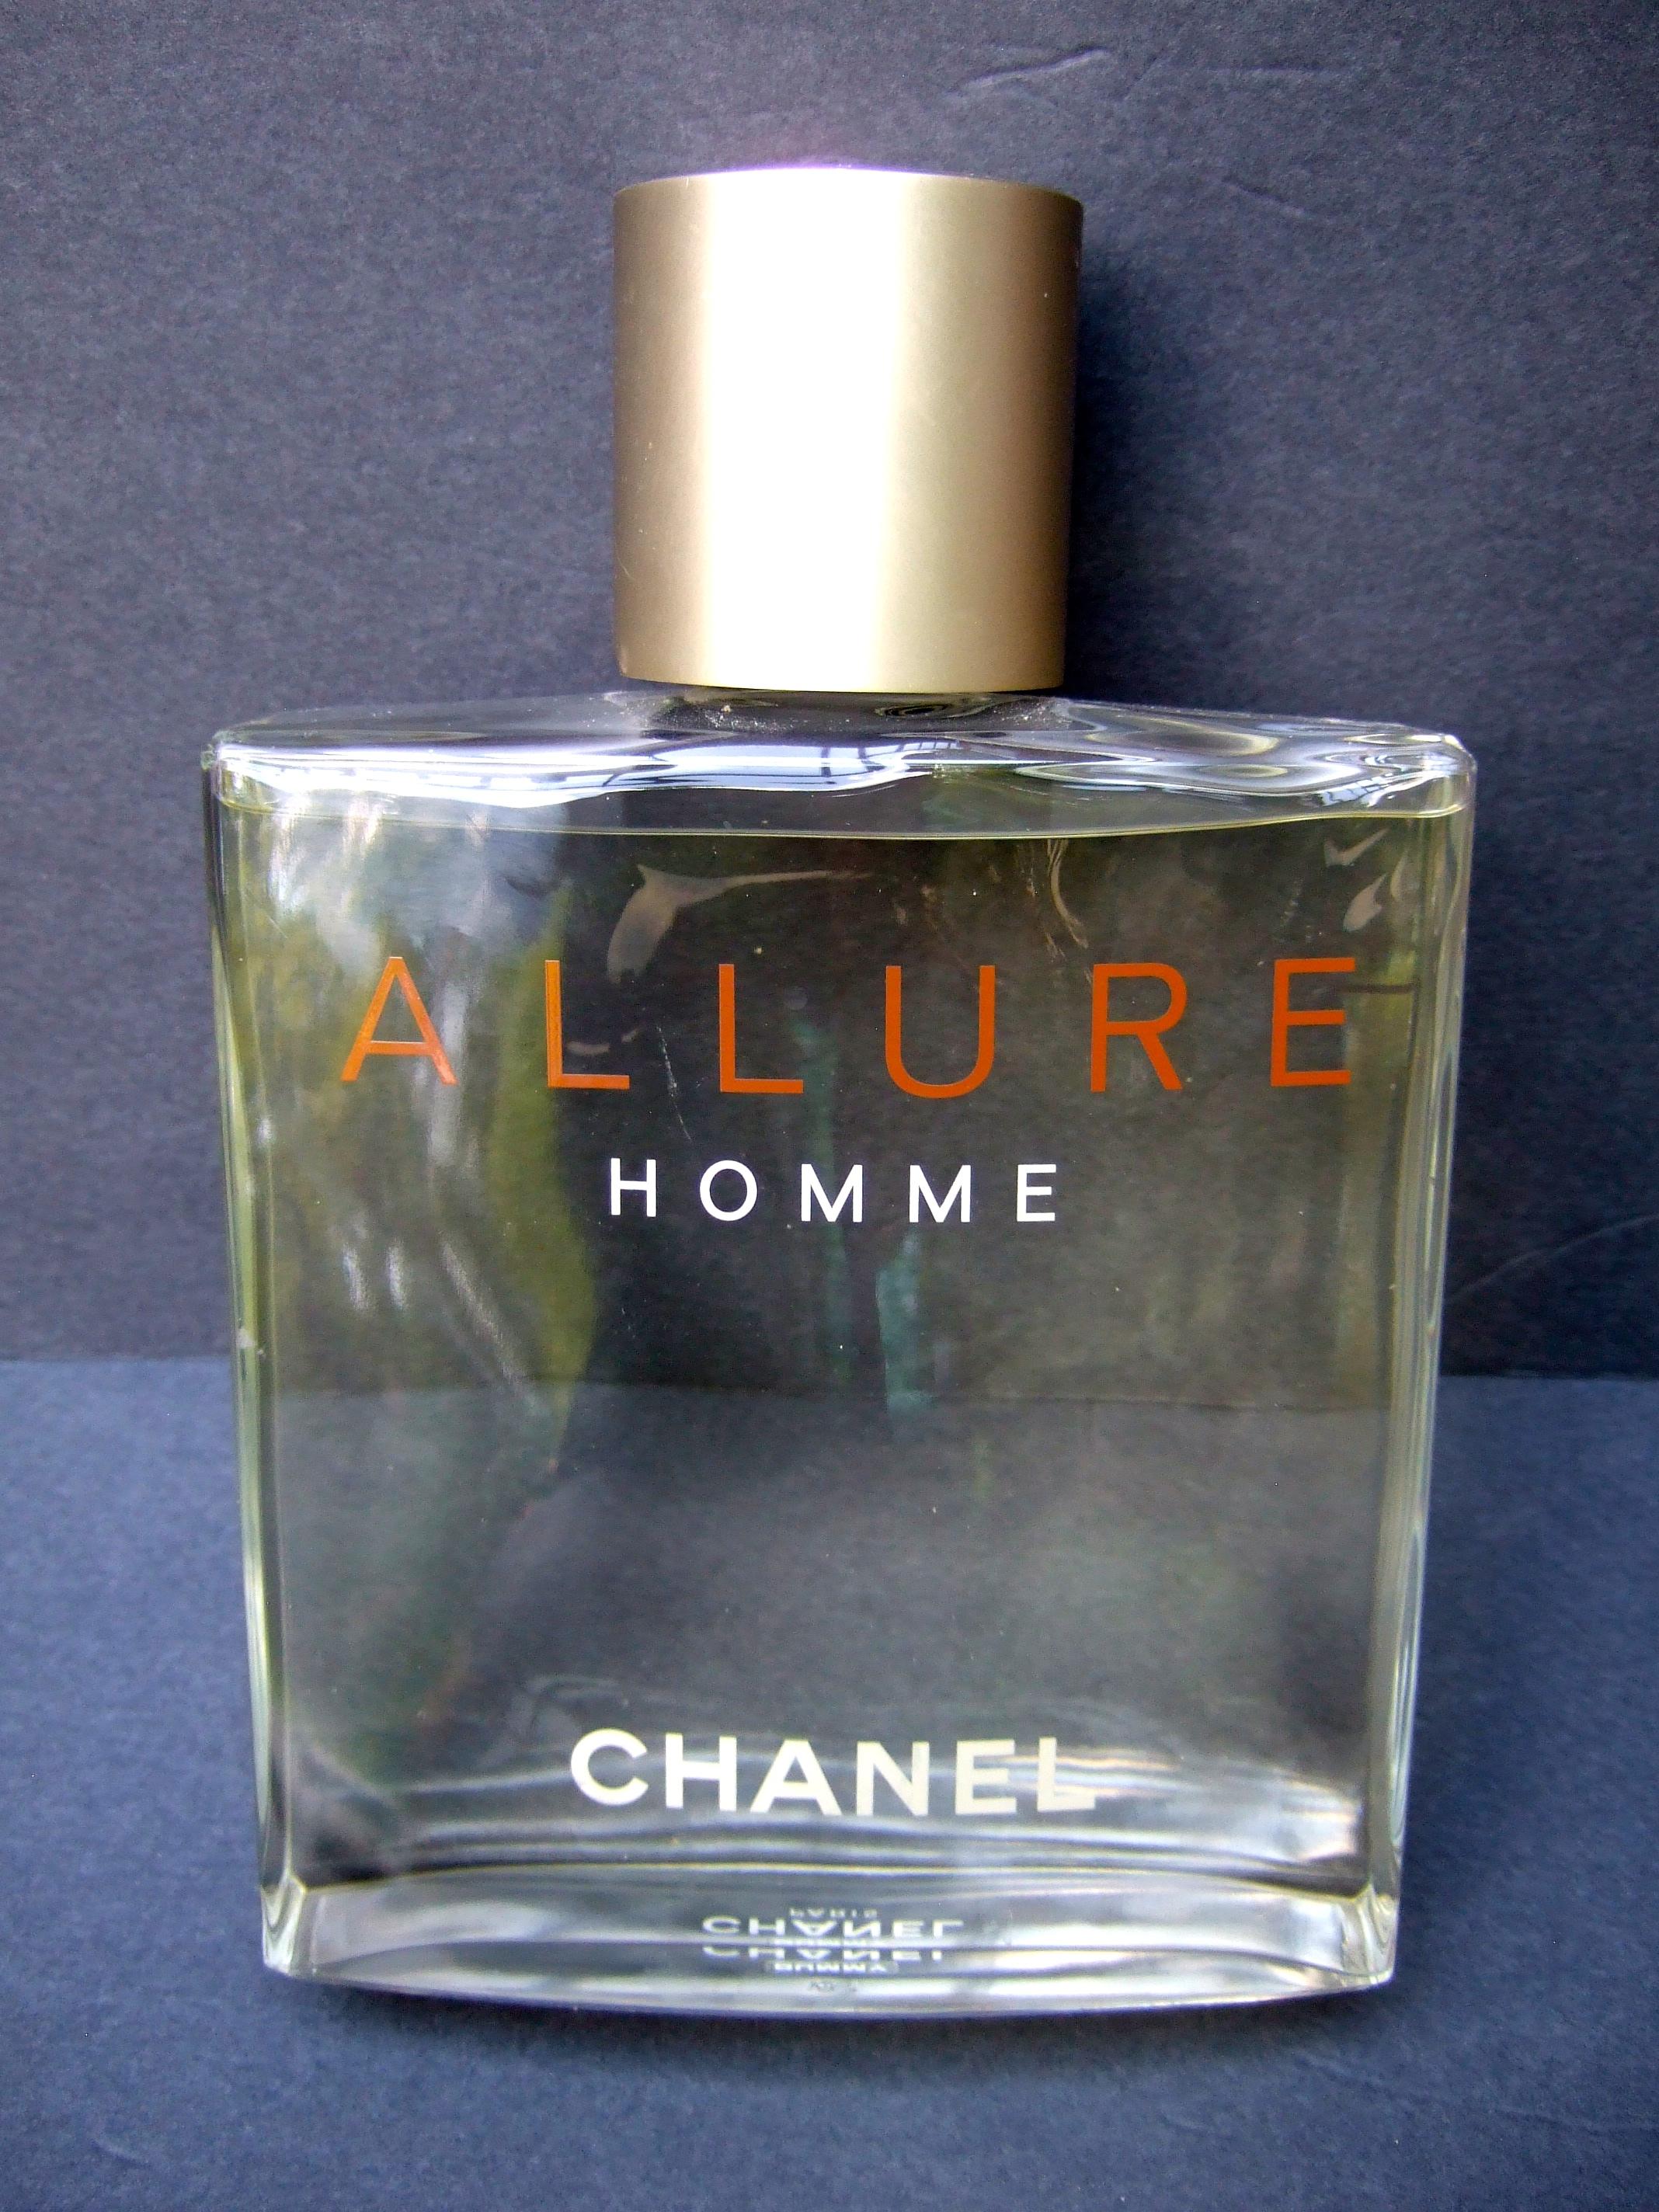 Chanel Allure Homme huge glass factice display dummy bottle c 21st 
The huge scale glass bottle makes a very stylish decorative collectible
 Factice dummy display bottle are filled with colored water
are displayed at department store fragrance